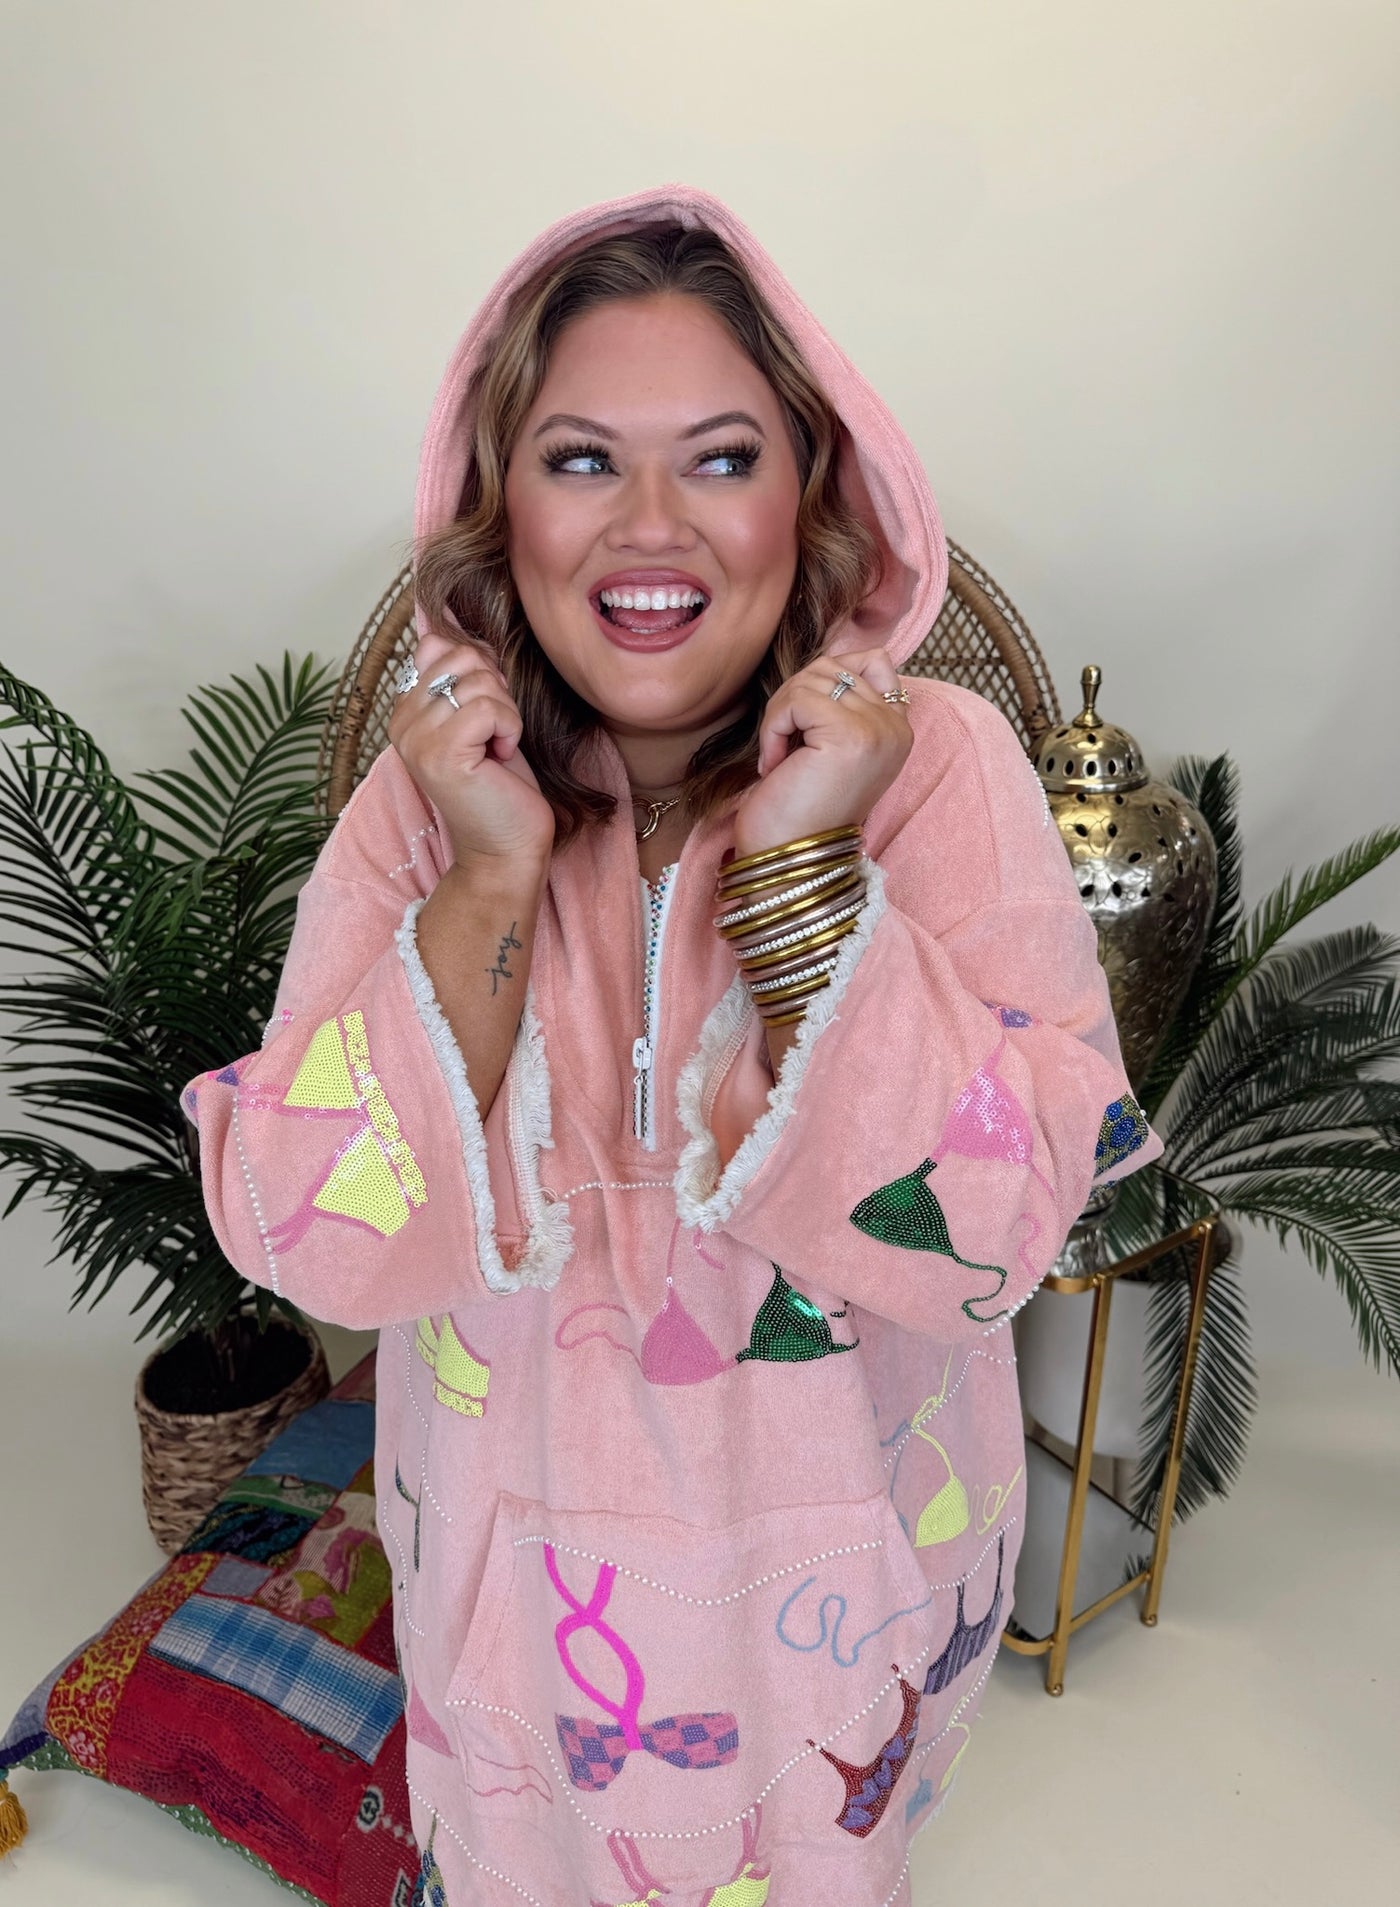 Queen of Sparkles Peach Hanging Swimsuits Hooded Terry Cloth Coverup